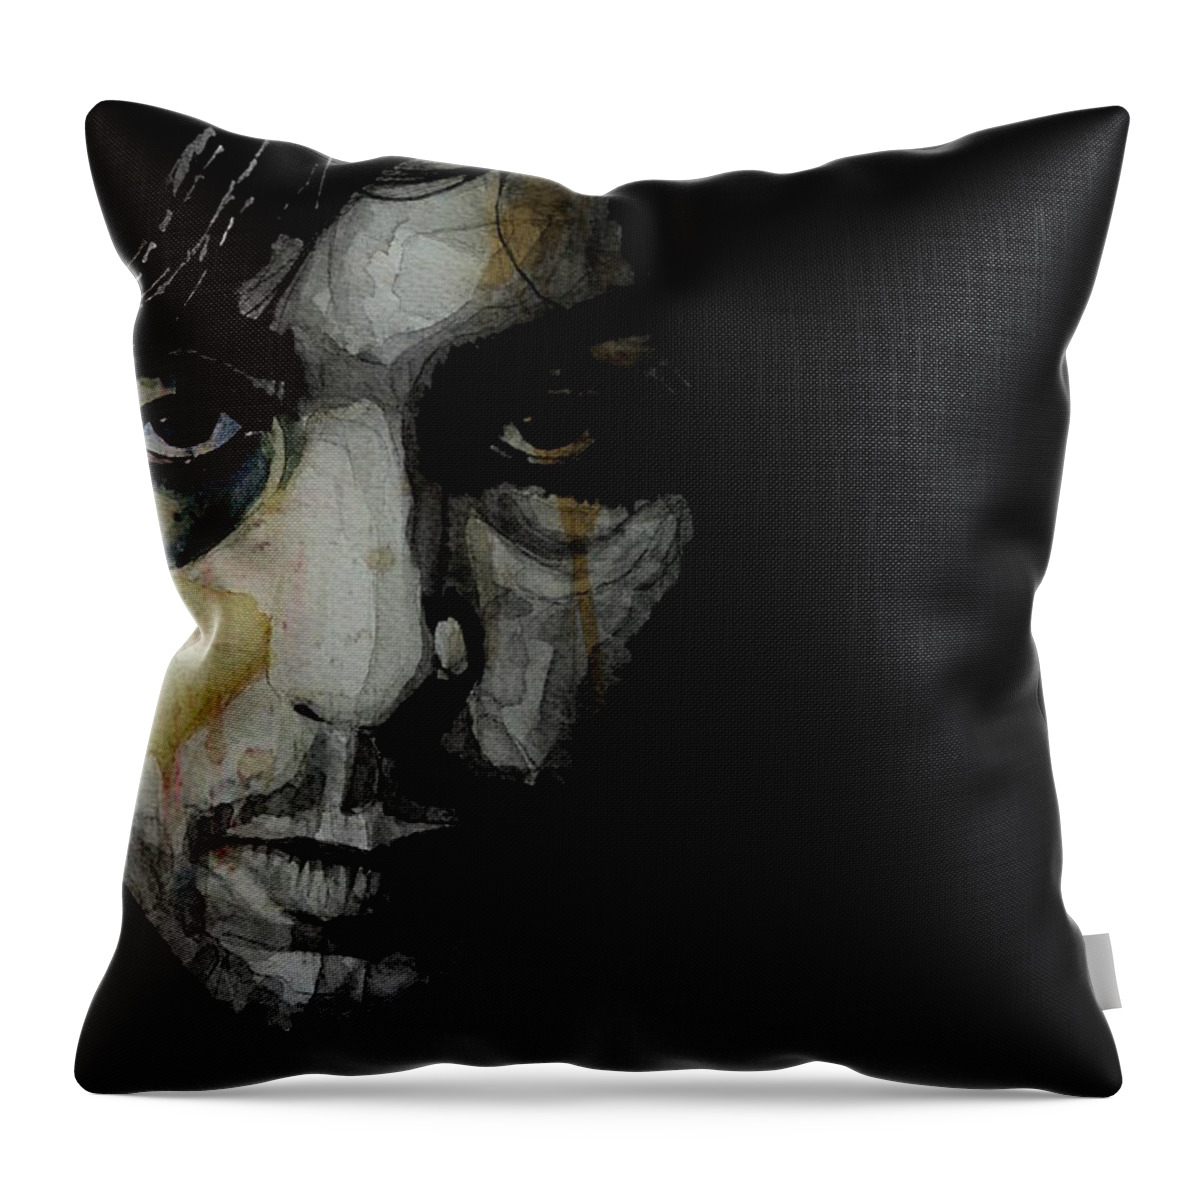 Syd Barrett Throw Pillow featuring the painting Crazy Diamond - Syd Barrett by Paul Lovering